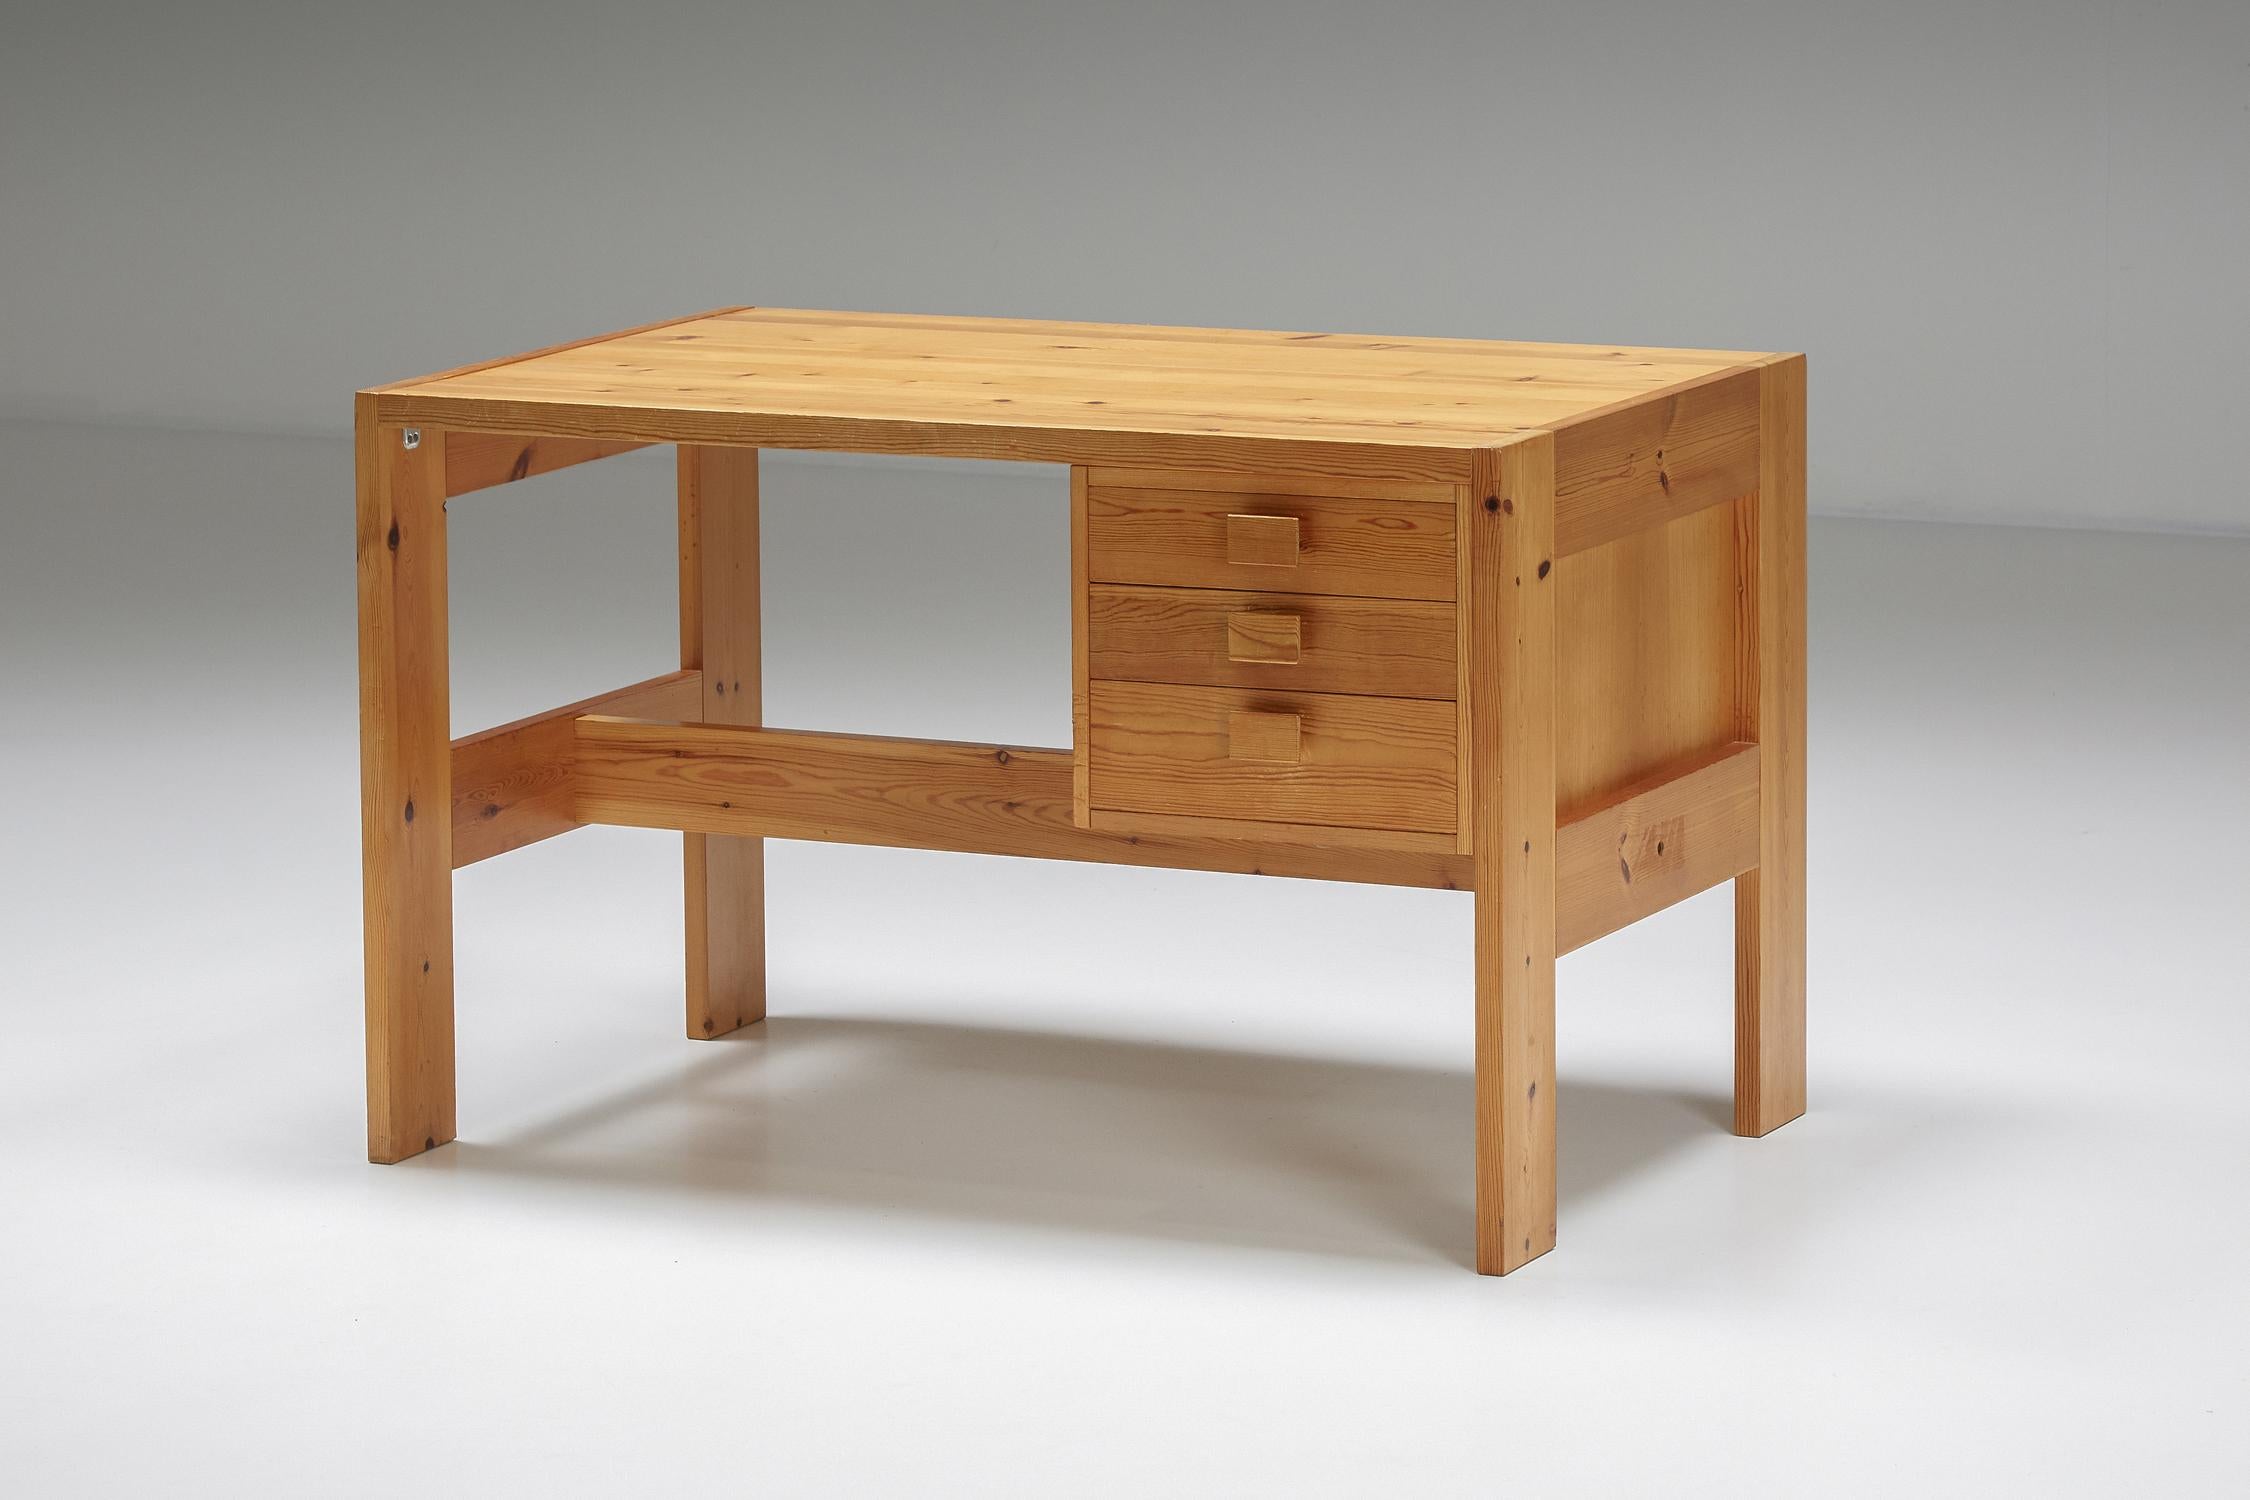 Wooden Desk; working desk; writing table; office furniture; Charlotte Perriand; French design; Mid-Century Modern; 1960s;

Desk in the style of French designer Charlotte Perriand, made of solid wood. The desk includes three drawers on the right